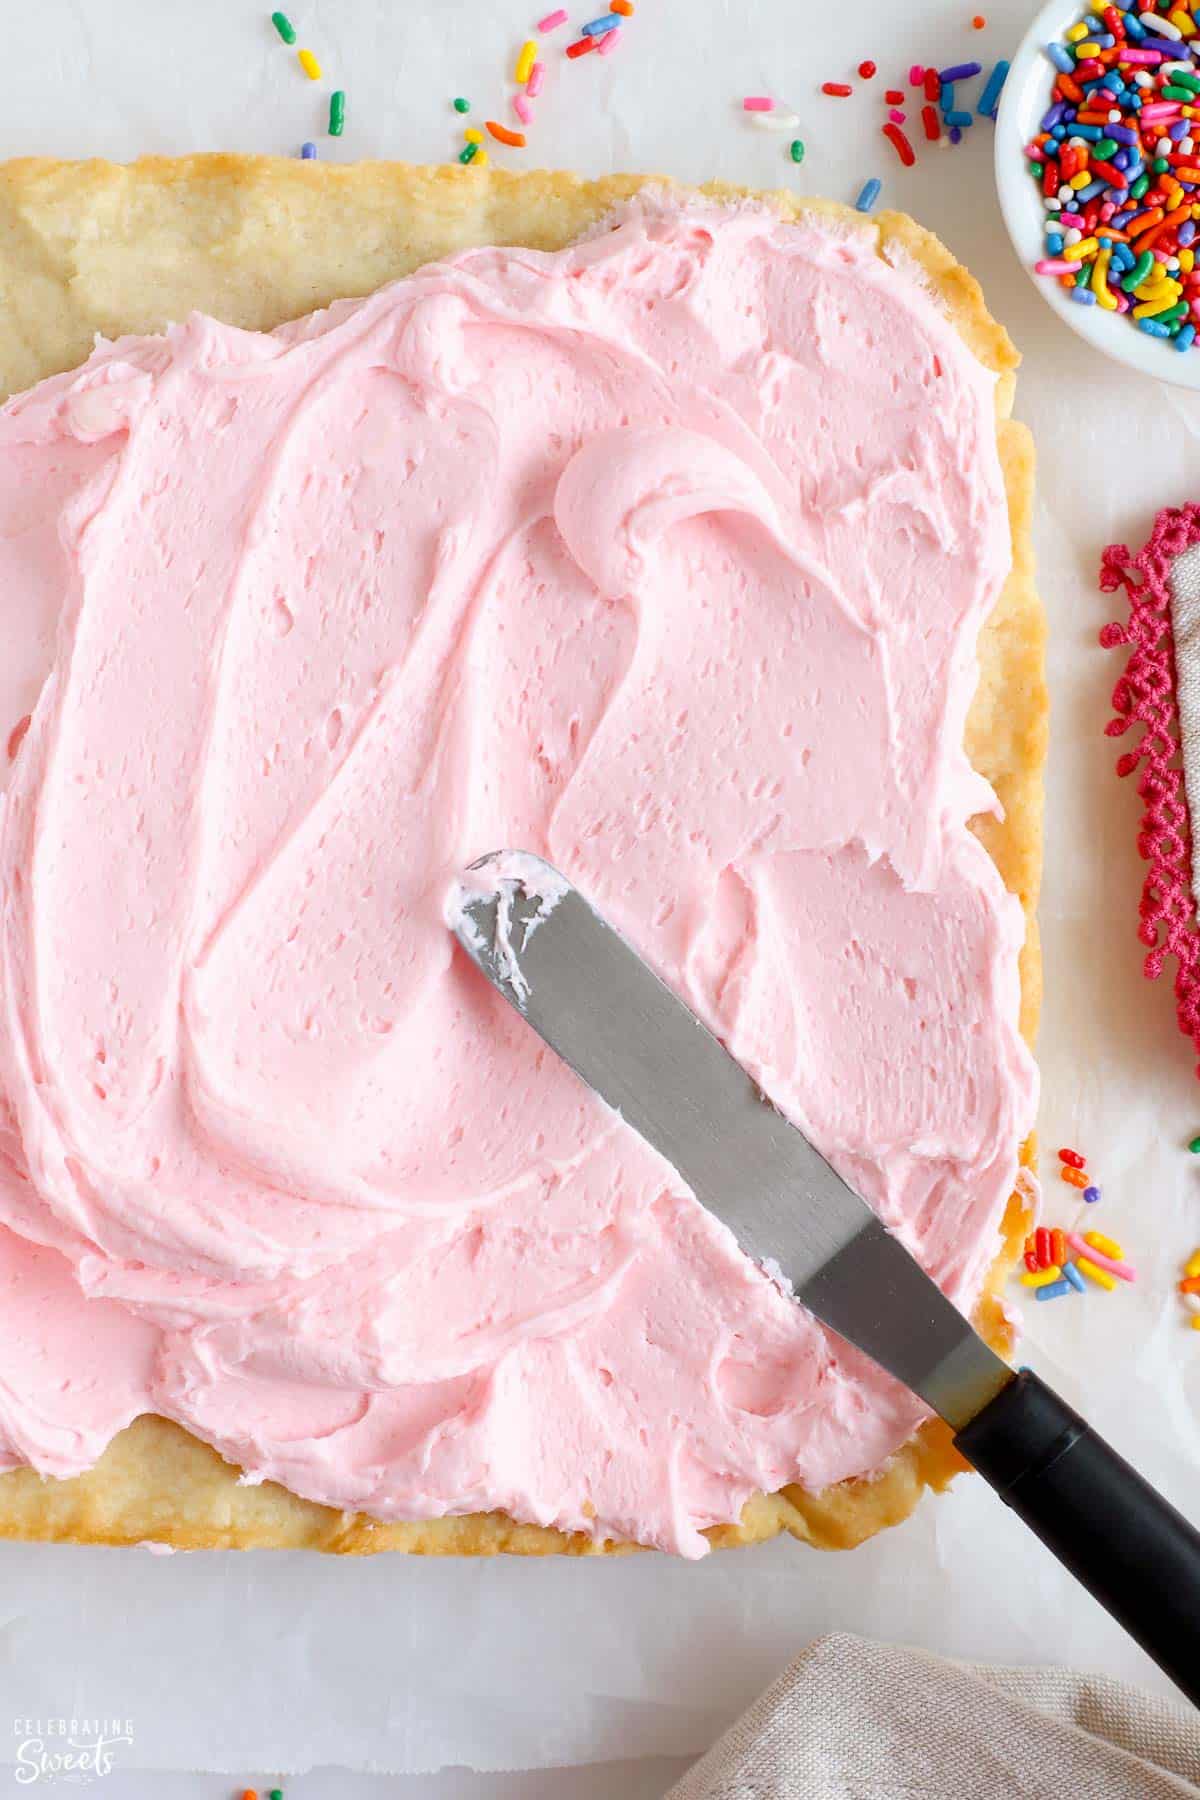 Pink frosting spread onto sugar cookie bars surrounded by sprinkles.